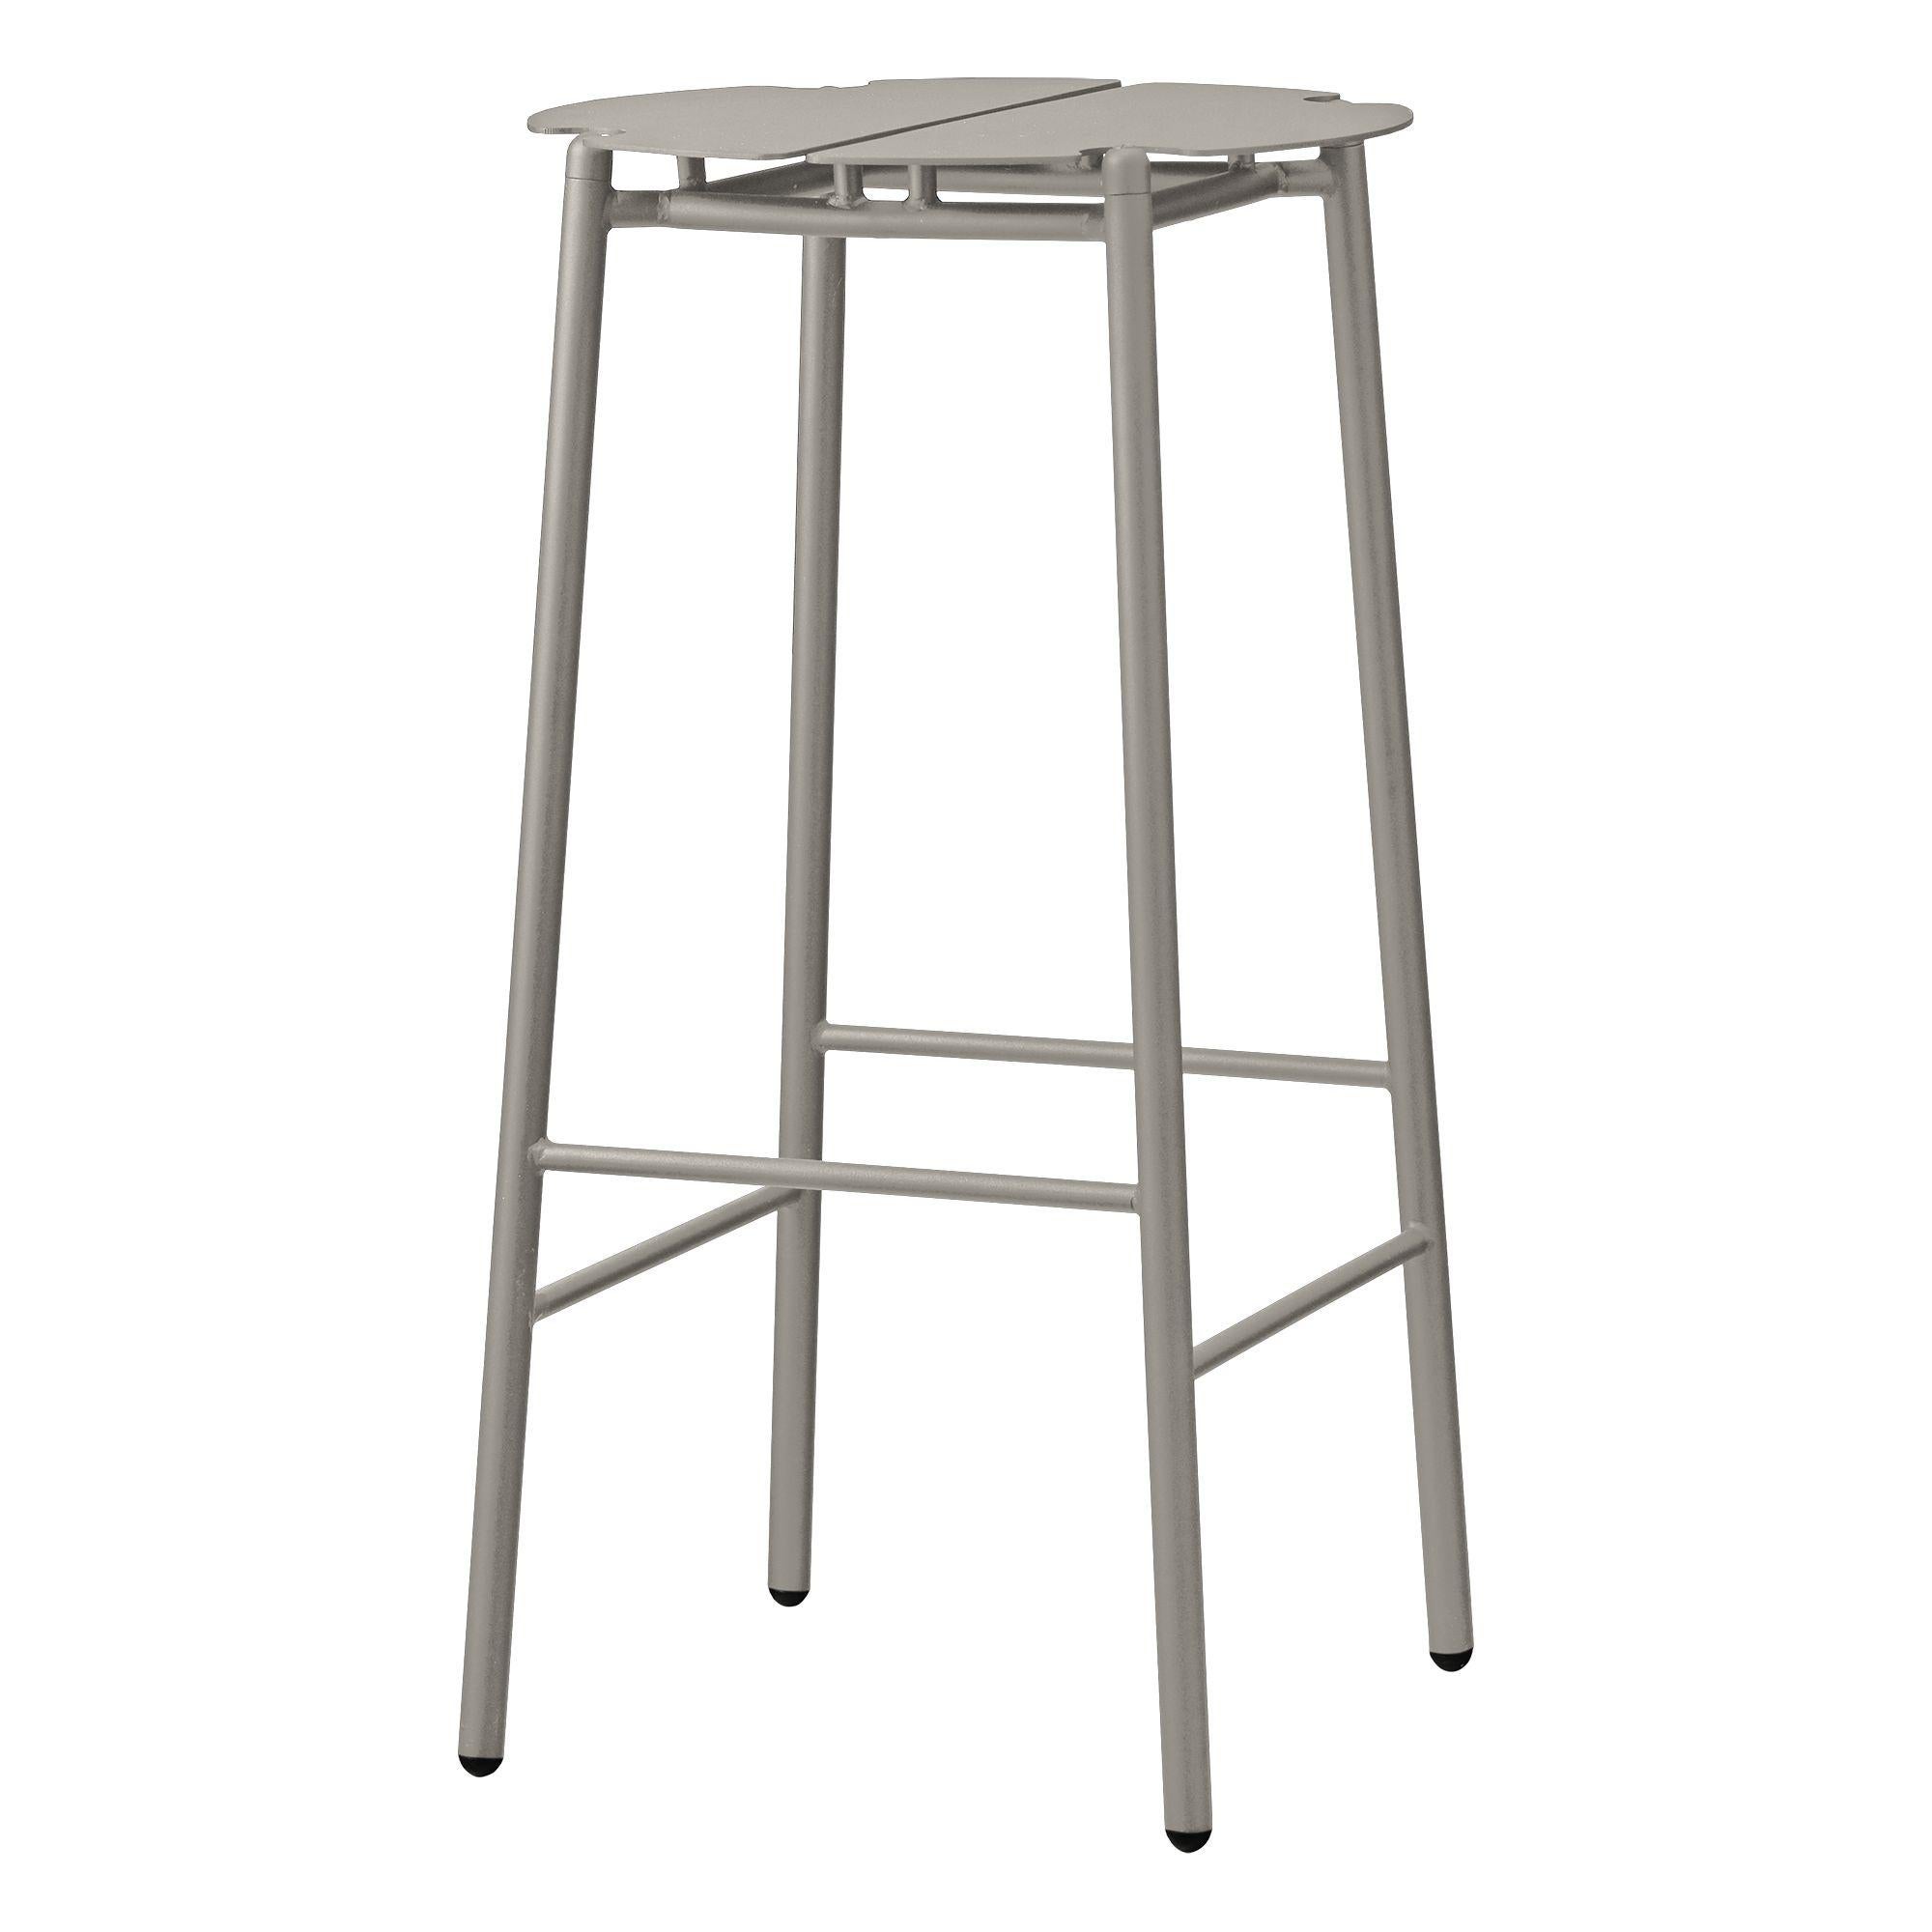 Taupe minimalist bar stool
Dimensions: Diameter 38 x height 75 cm
Materials: steel w. Matte powder coating & aluminum w. Matte powder coating.
Available in colors: taupe, bordeaux, forest, ginger bread, black and, black and gold.


Create a